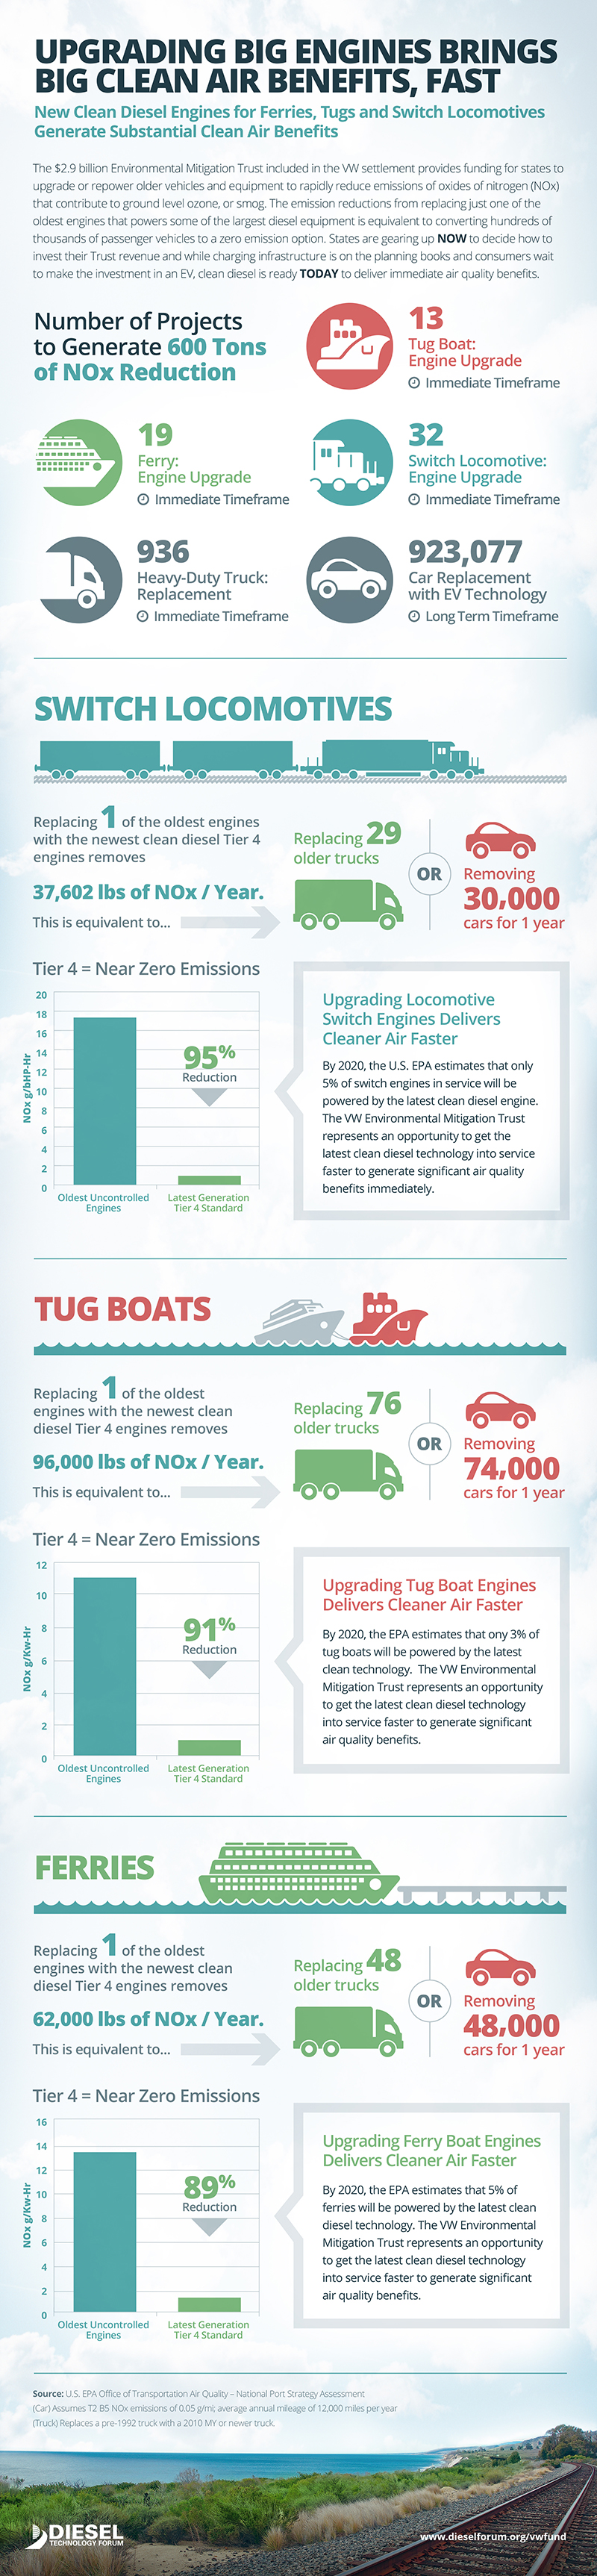 Upgrading big engines brings big clean air benefits, fast. New clean diesel engines for ferries, tugs and switch locomotives generate substantial clean air benefits.